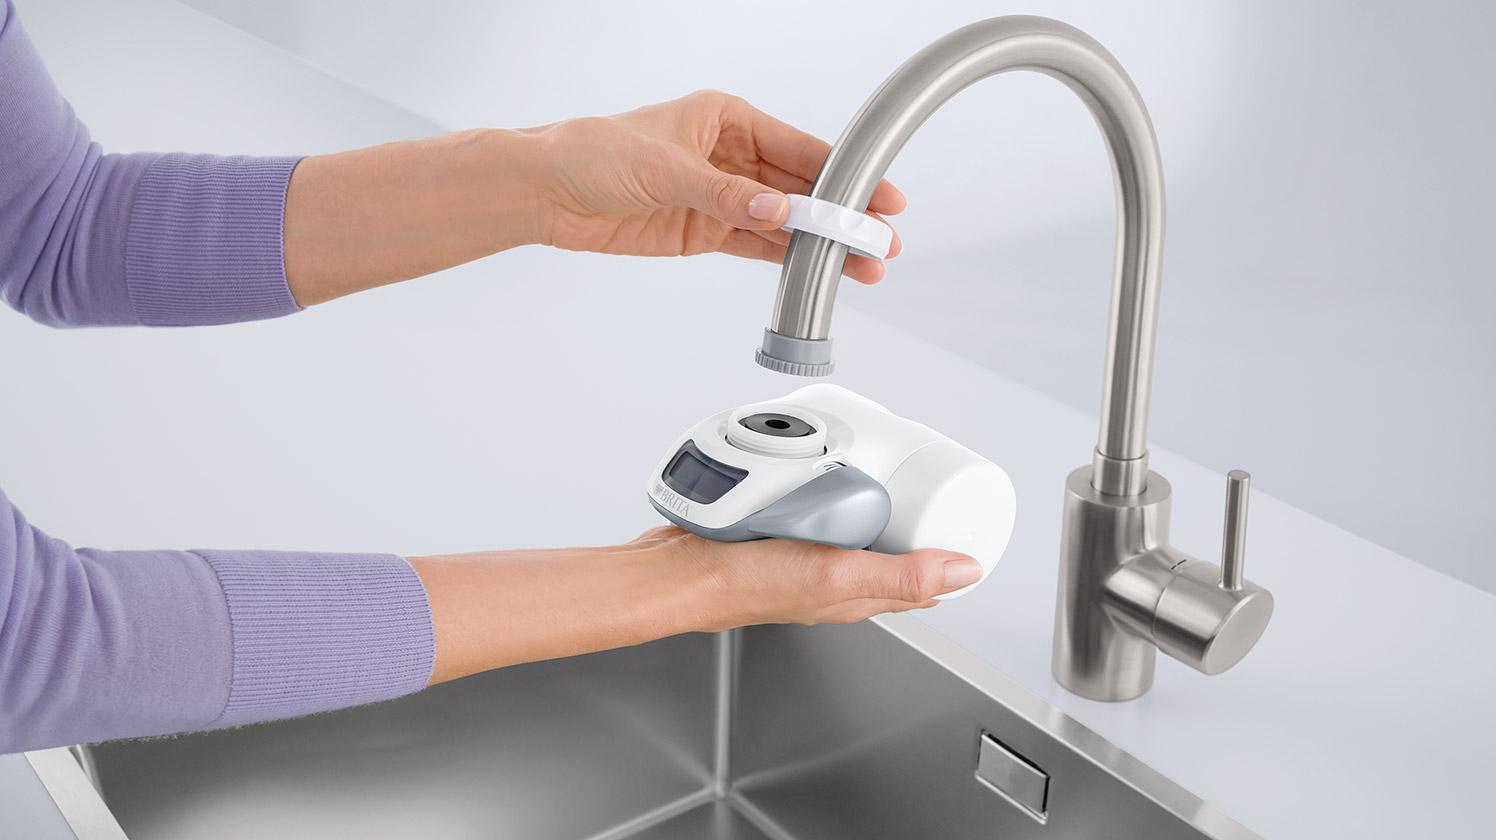 How to Install a Brita Filter on a Faucet: 15 Steps